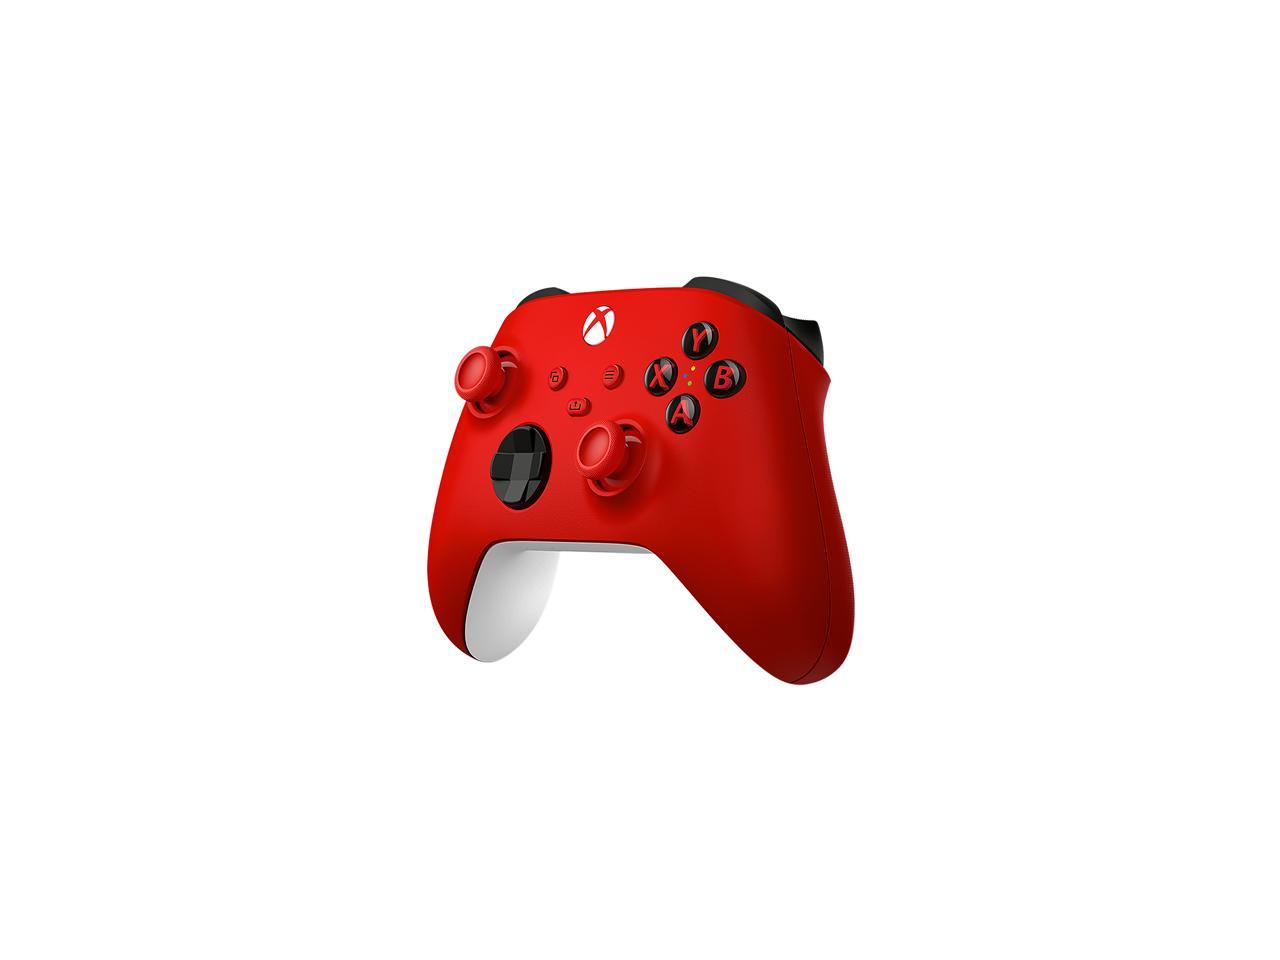 Microsoft Xbox Wireless Controller - Pulse Red - image 5 of 7